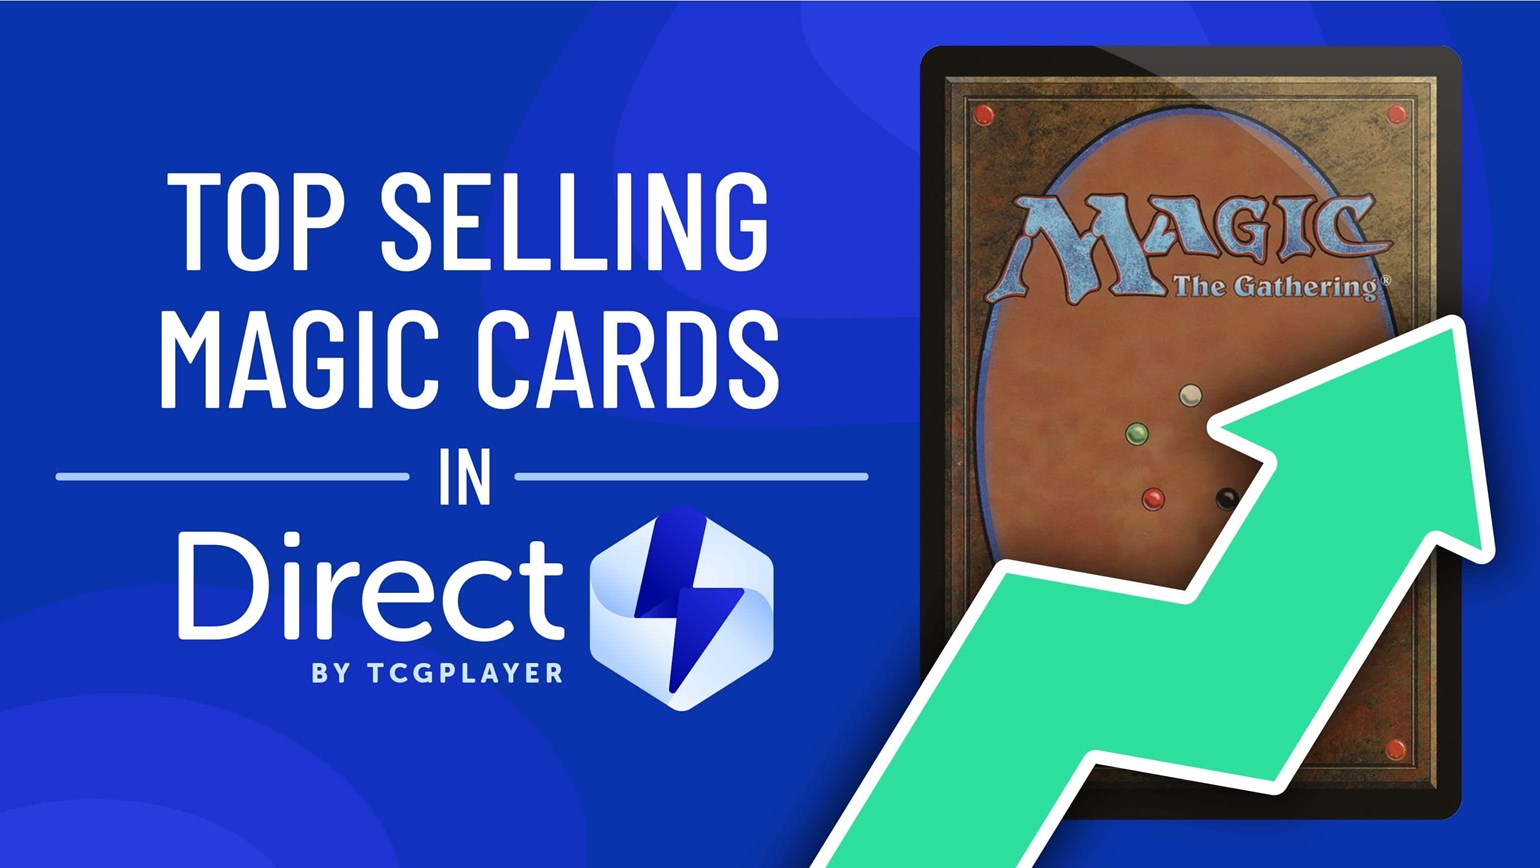 September Top Selling Magic: The Gathering Cards Under $25 in Direct by TCGplayer